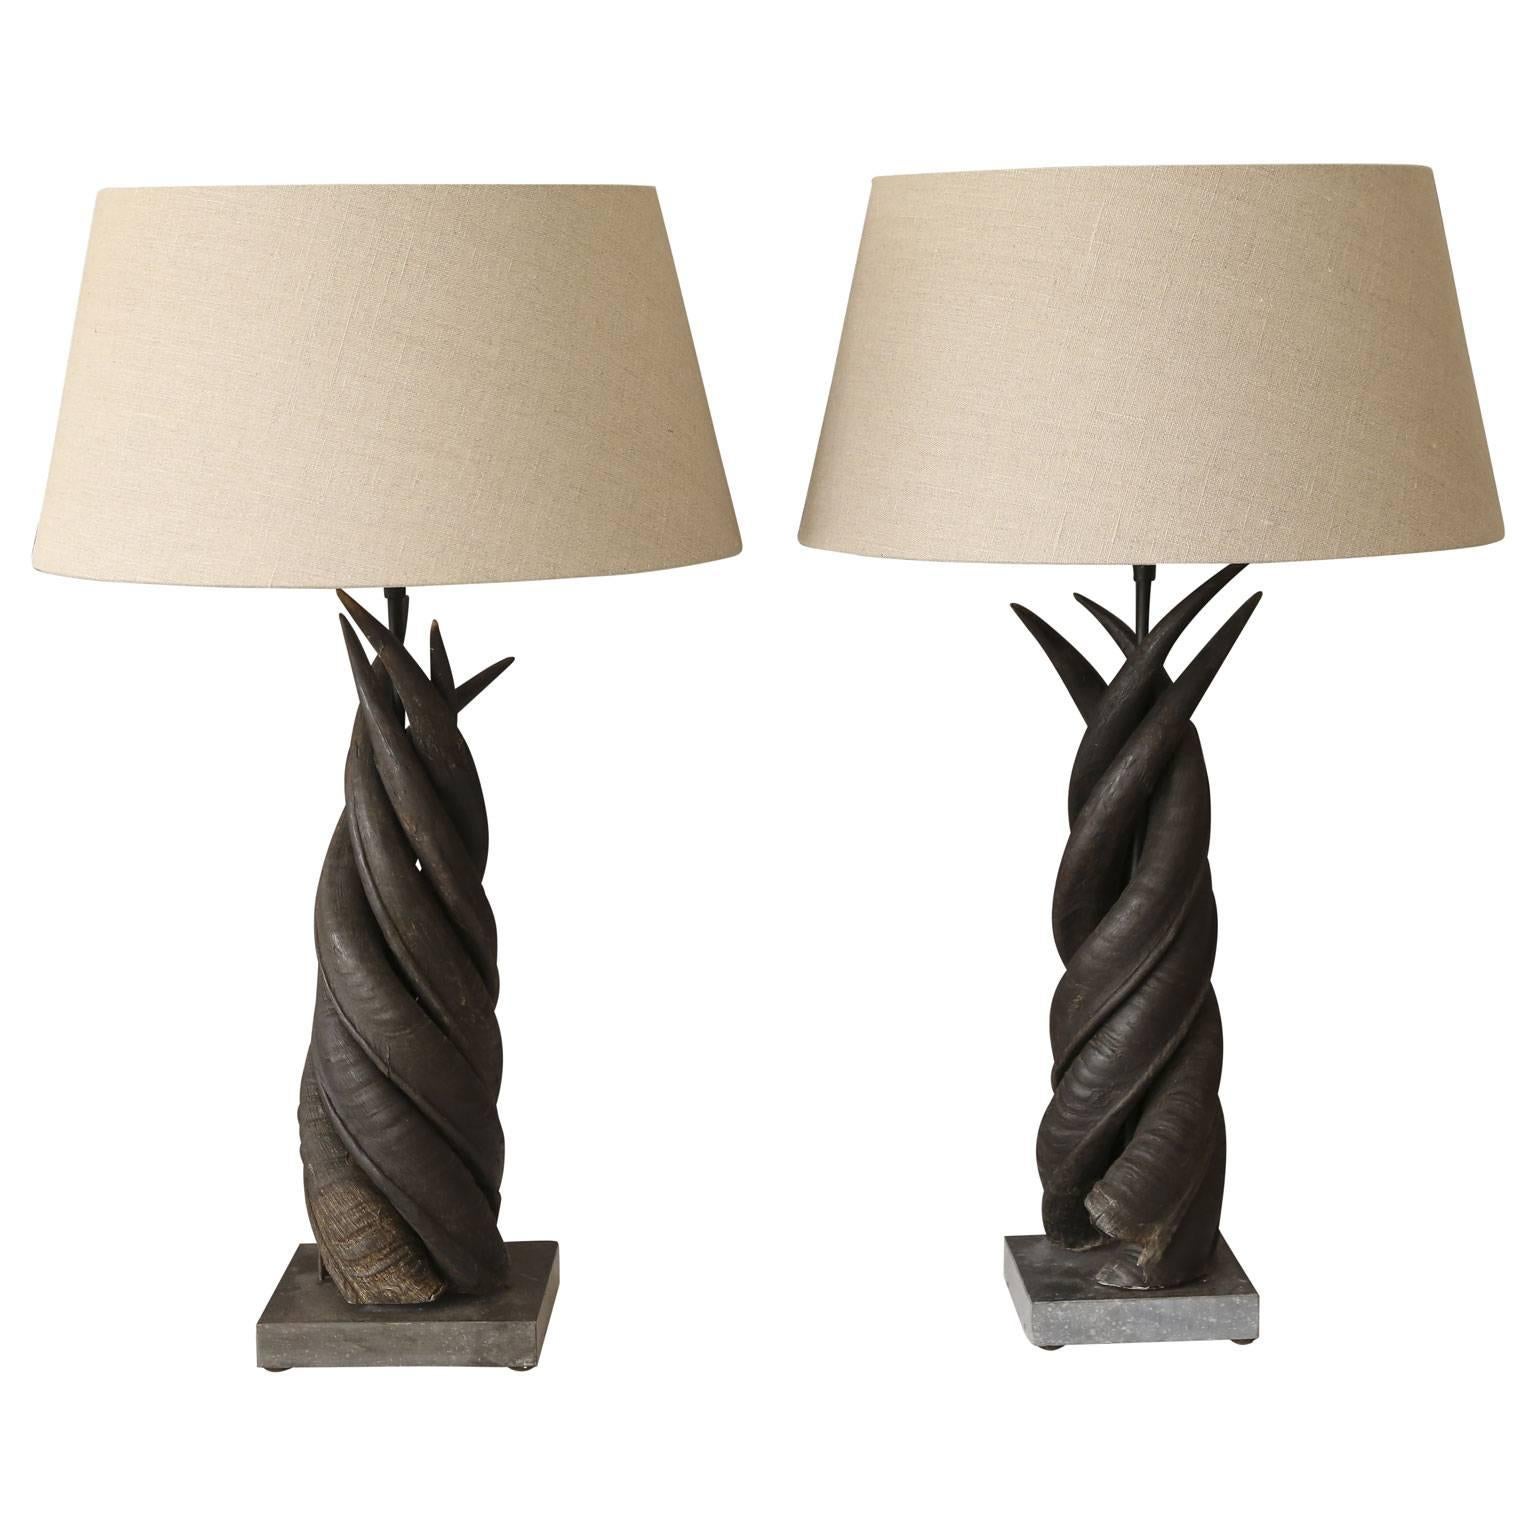 Polished Pair of Spiraled Horn Table Lamps